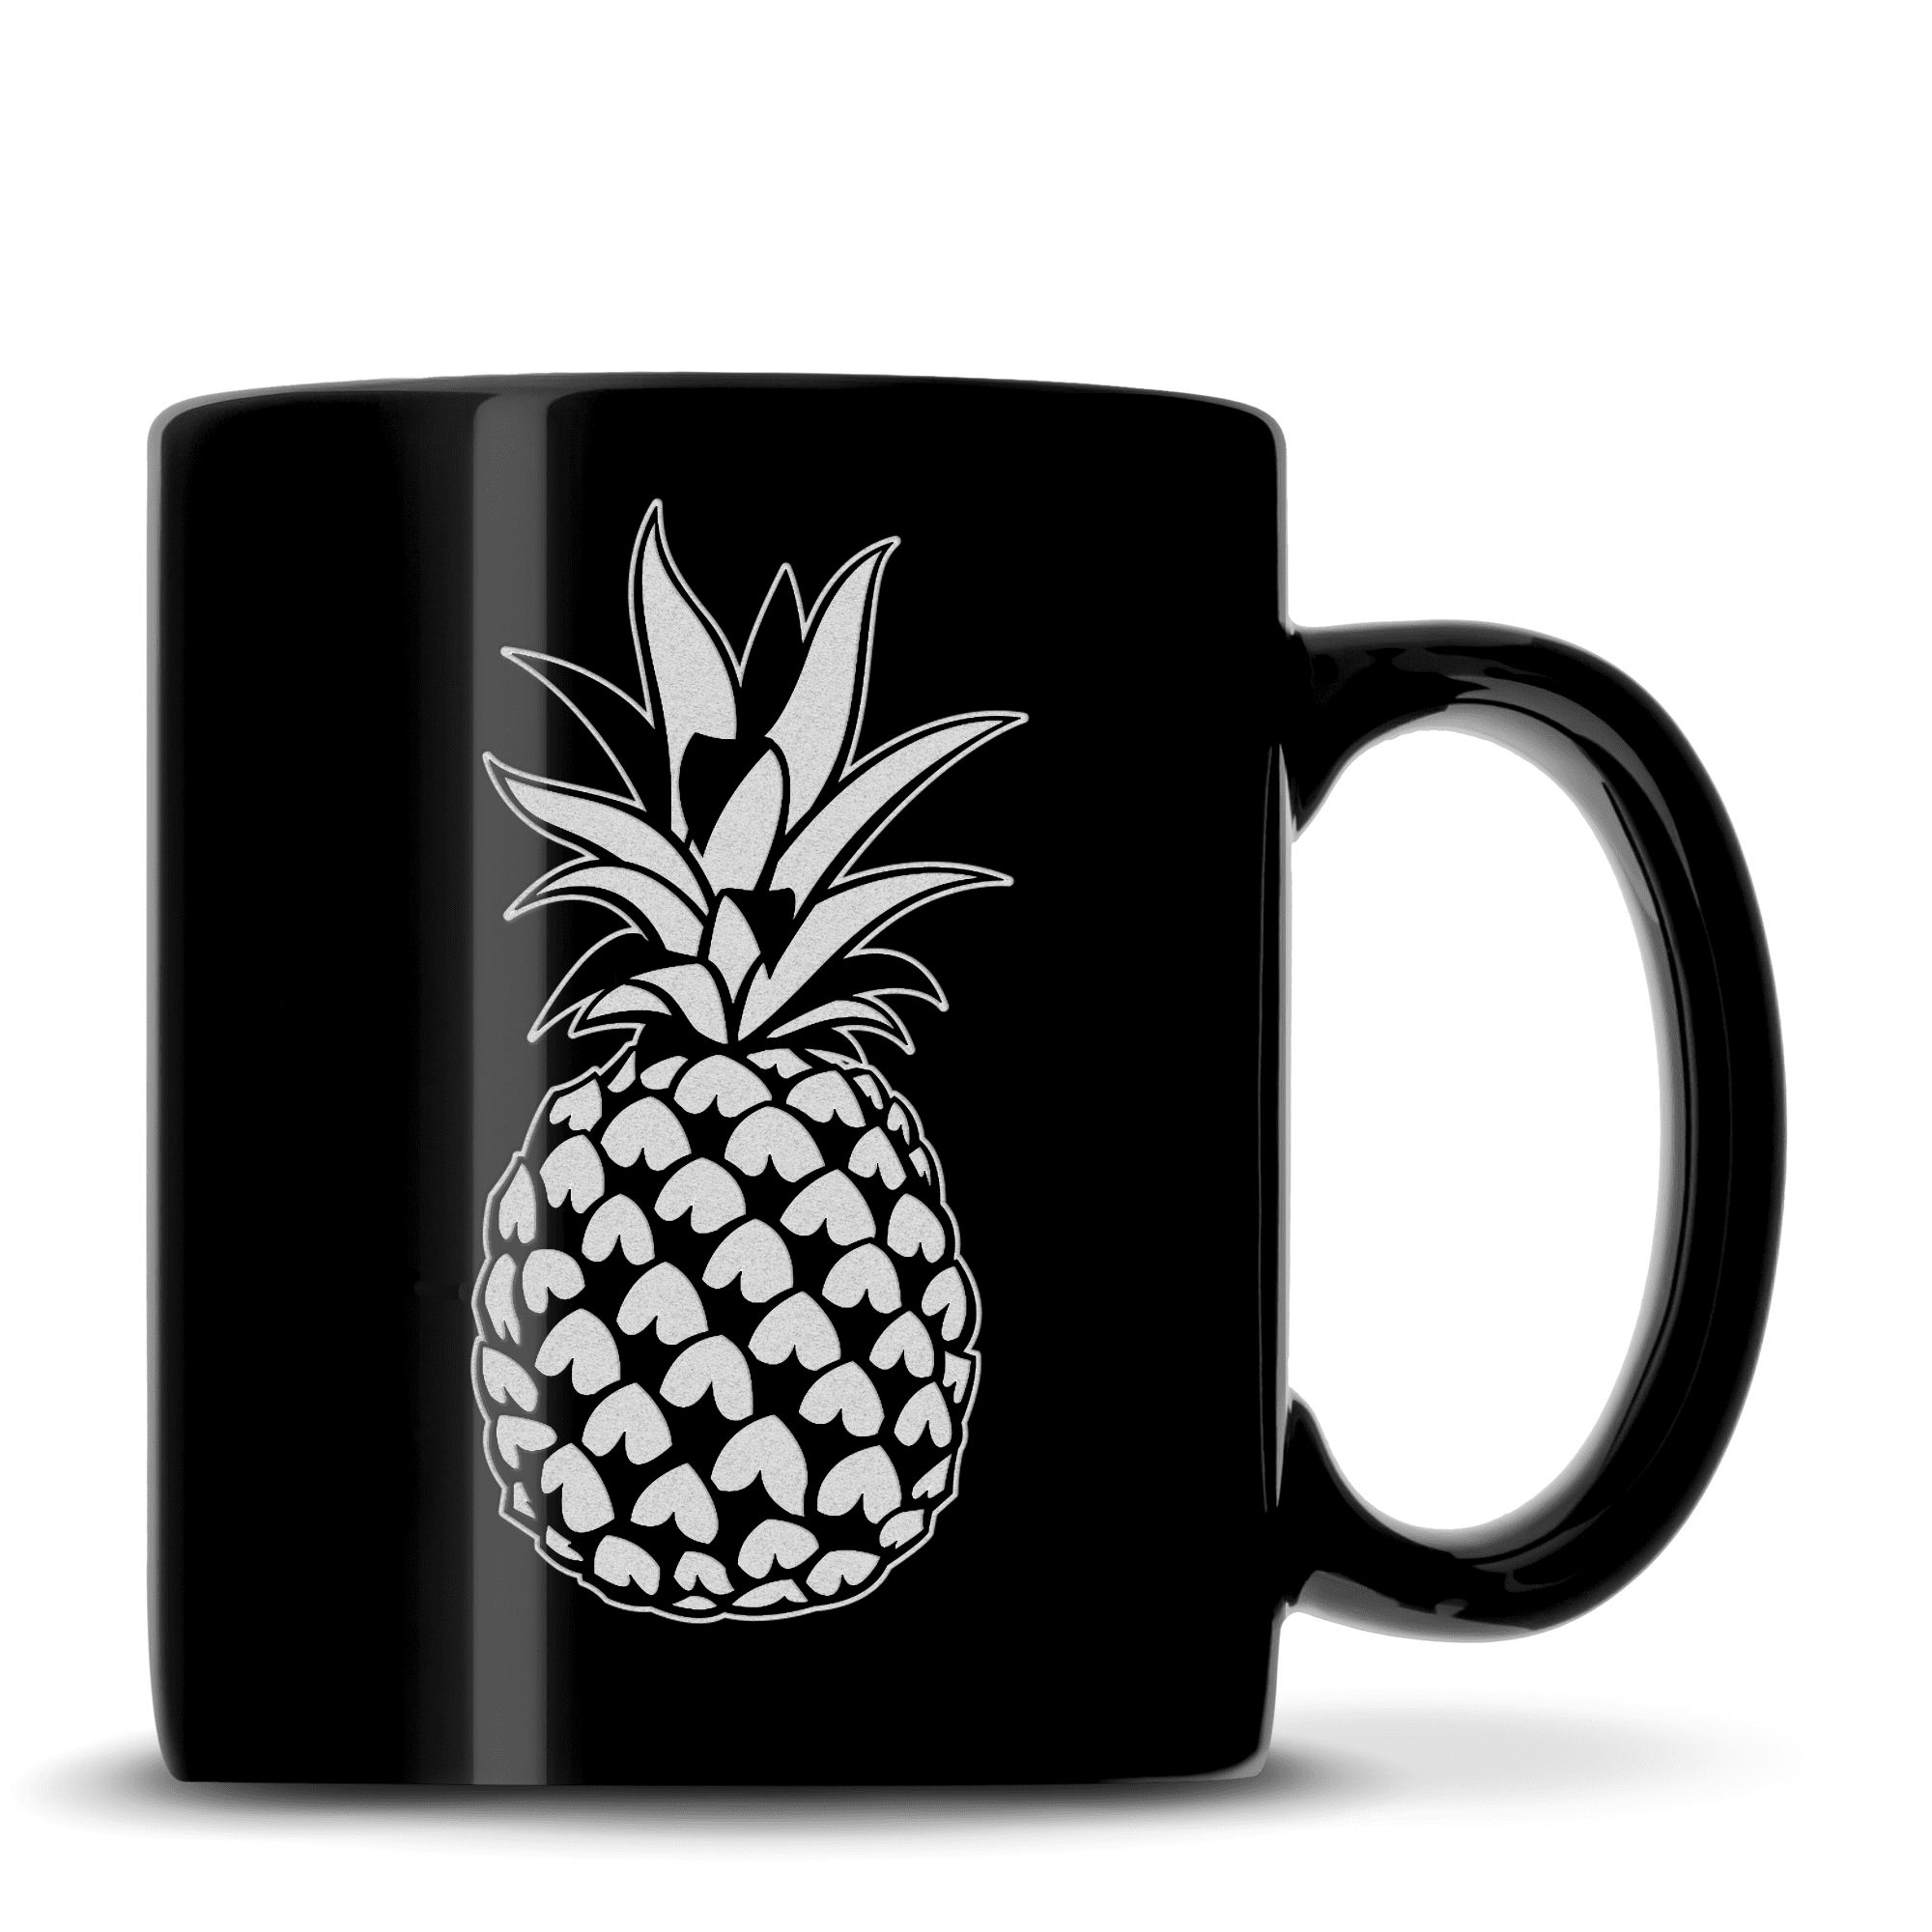 https://integritybottles.com/cdn/shop/products/black-coffee-mug-with-pineapple-design-deep-etched-integrity-bottles-3599396798580_2000x.png?v=1571303304